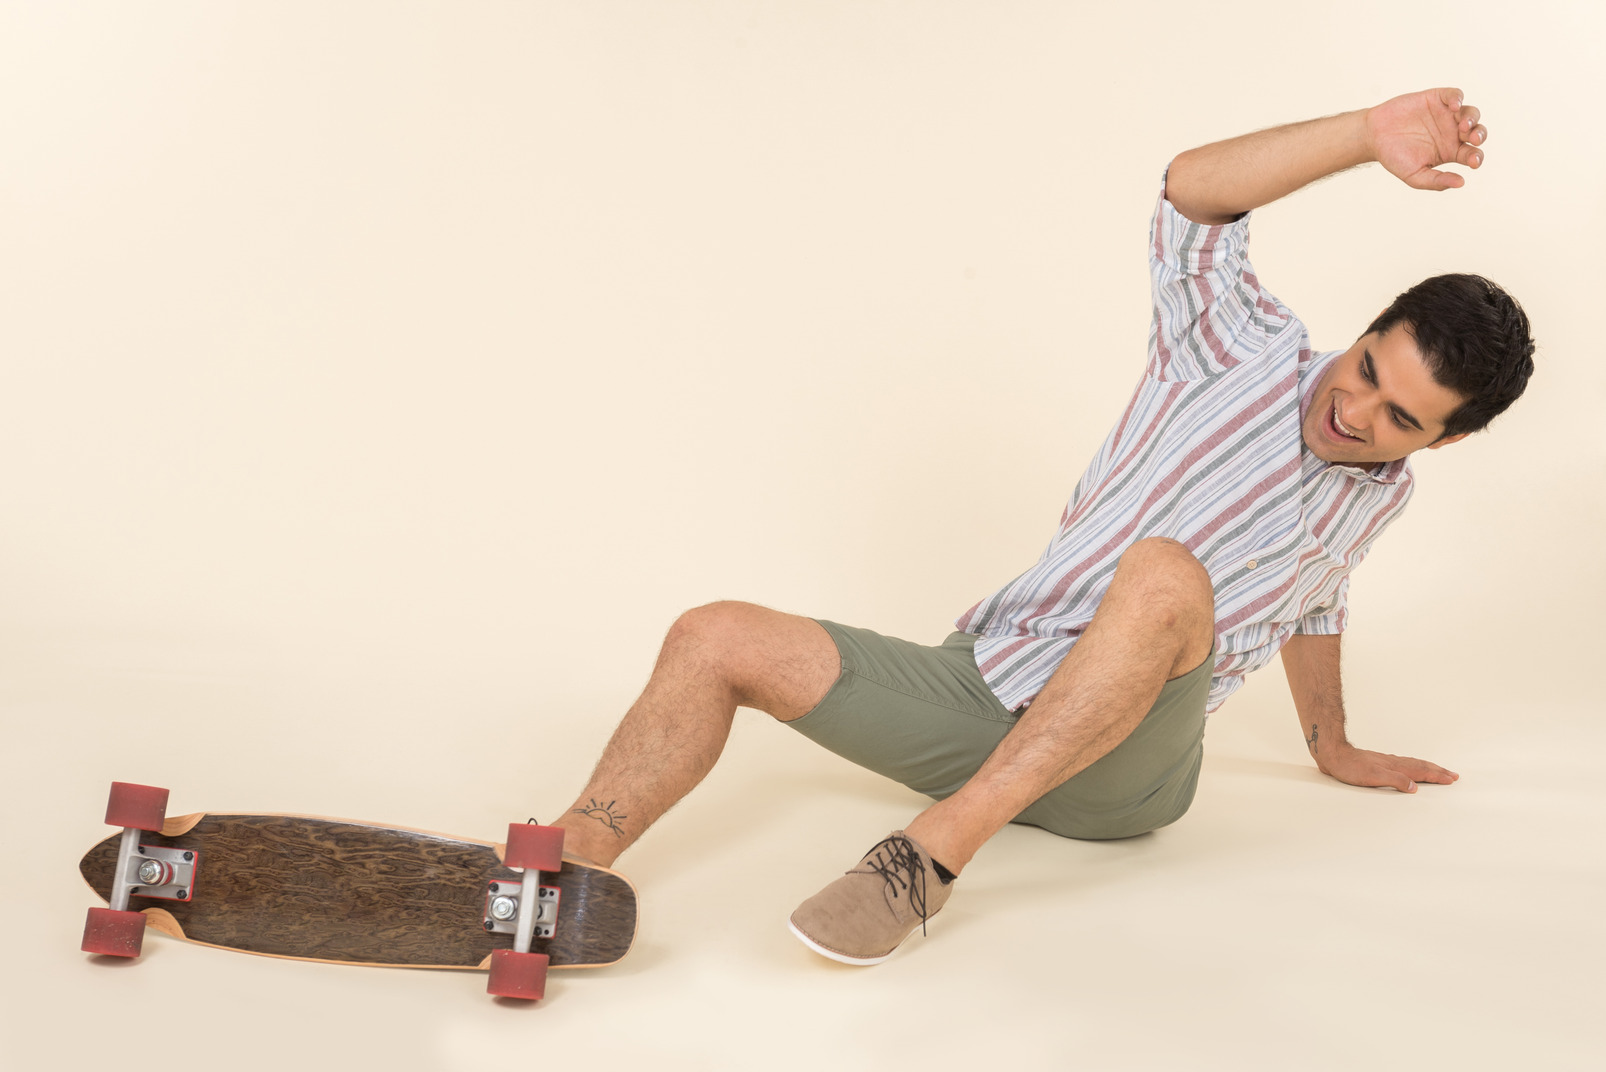 A nice-looking caucasian guy in a striped t-shirt, having fun learning how to ride a skateboard